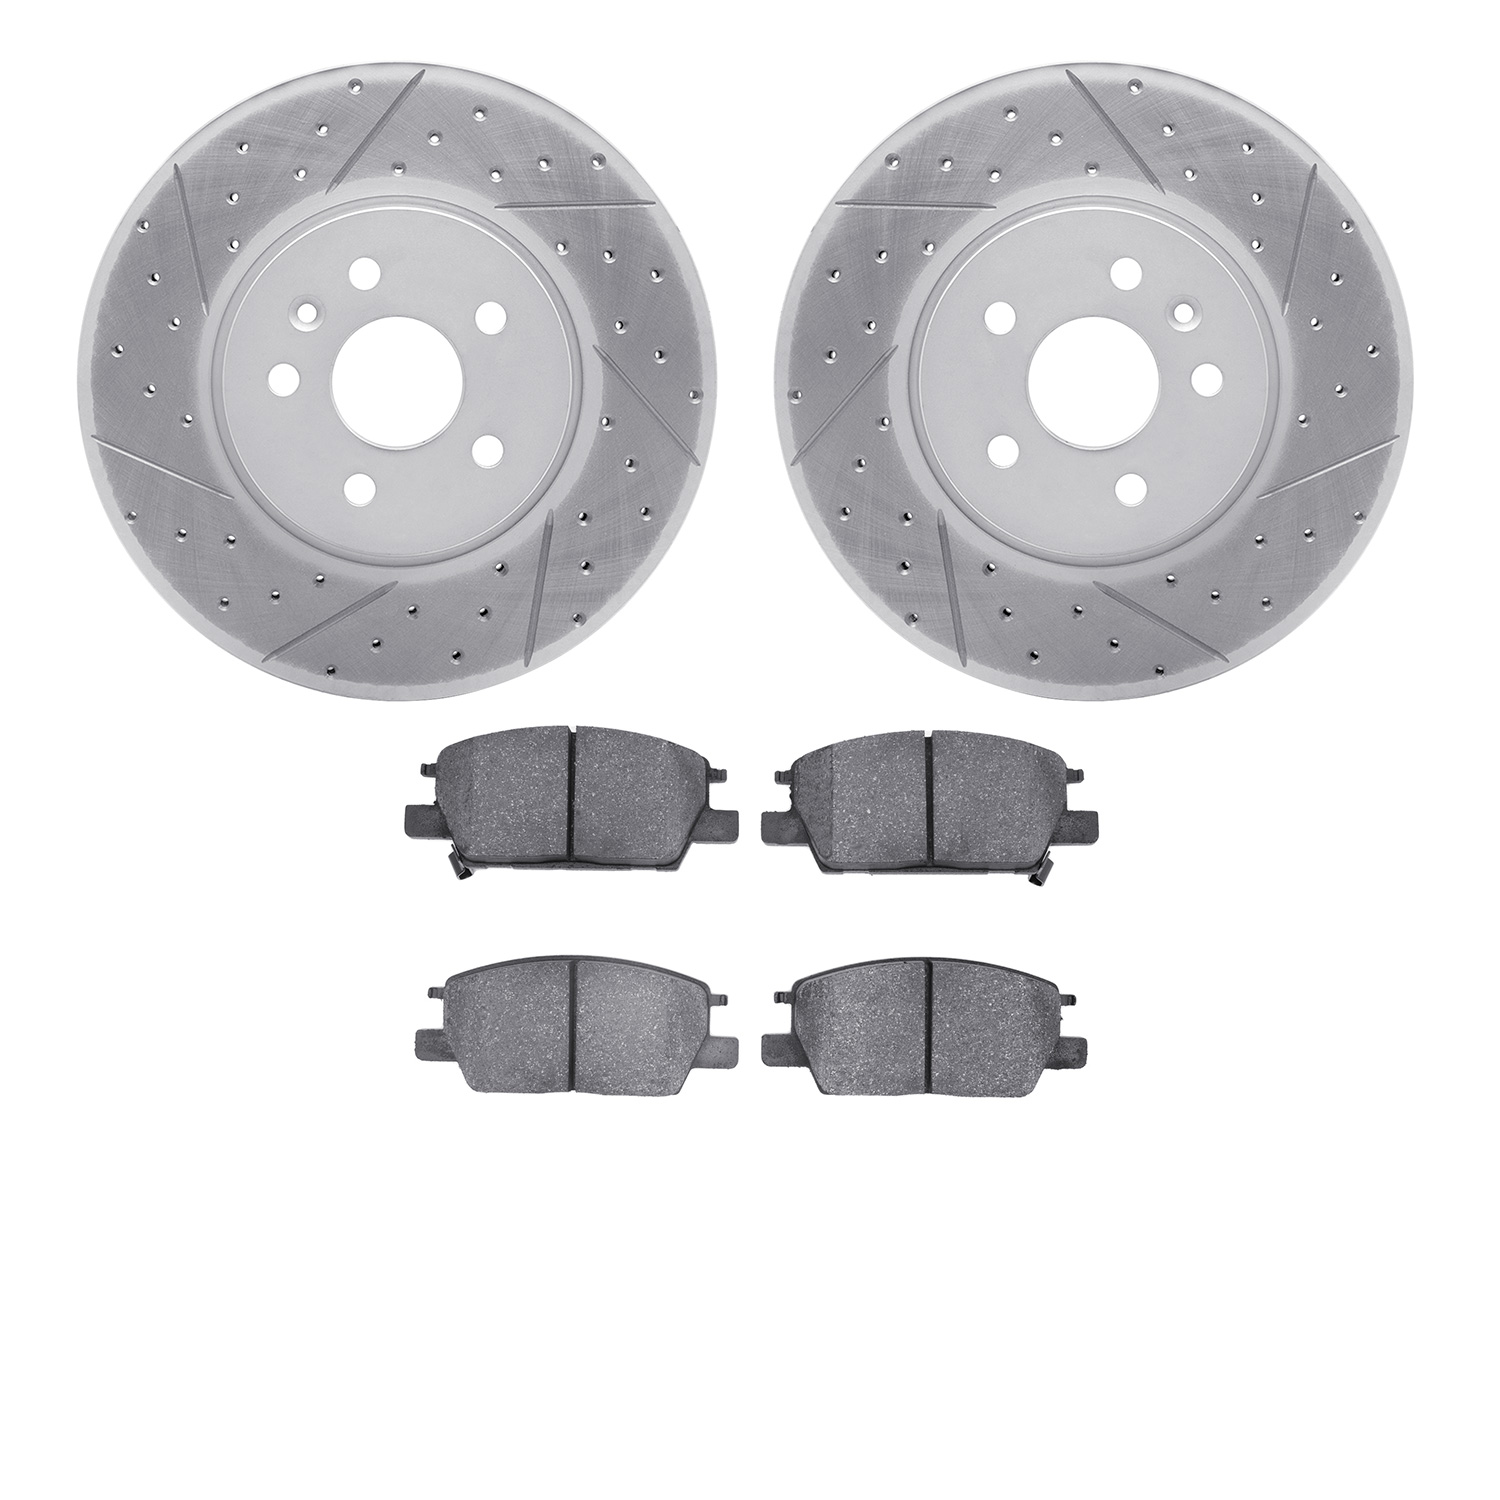 2502-45032 Geoperformance Drilled/Slotted Rotors w/5000 Advanced Brake Pads Kit, Fits Select GM, Position: Front